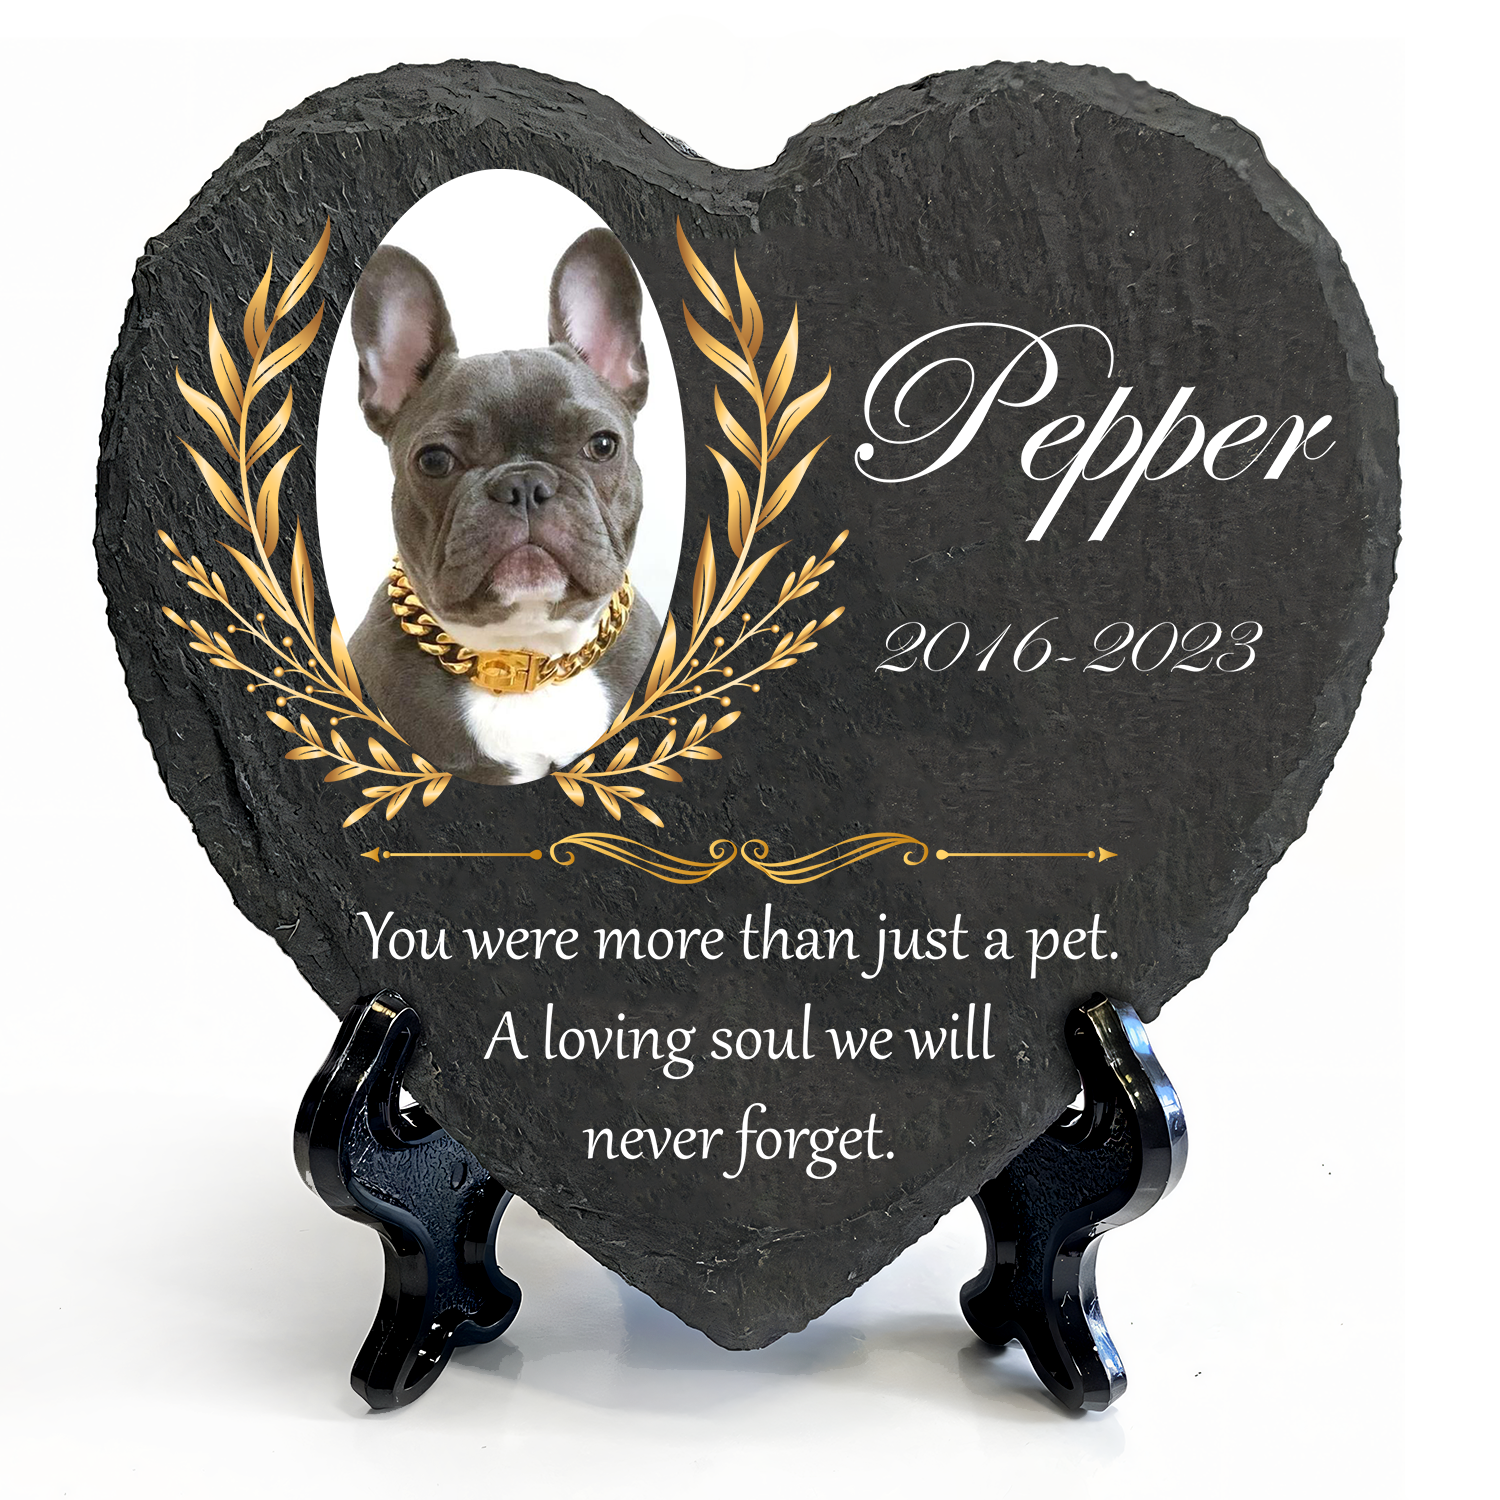 Vintage Golden Frame Pet Photo You Were More Than Just A Pet Custom Dog Memorial Stone, Pet Memorial Gifts - Personalized Custom Memorial Tombstone